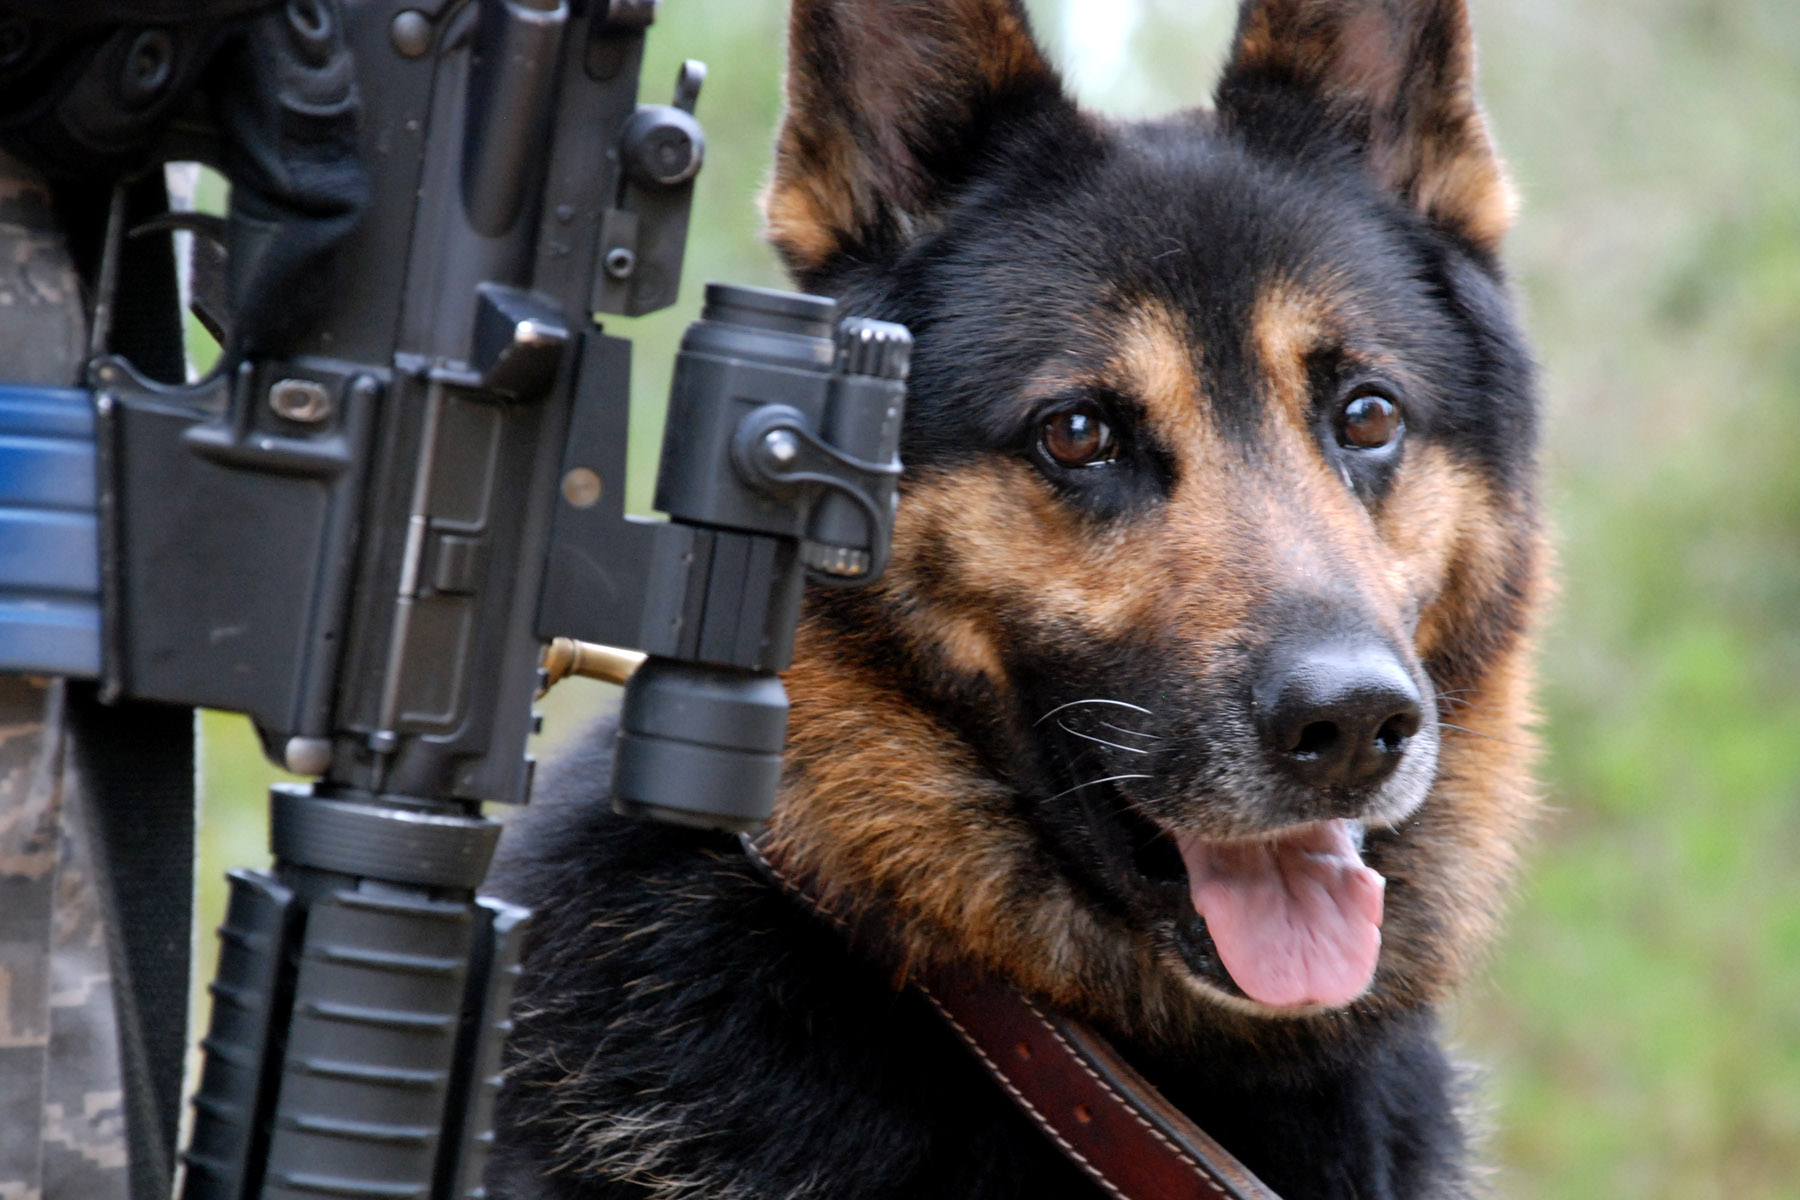 Rexo, the Brave Defender Military Working Dog, MWD